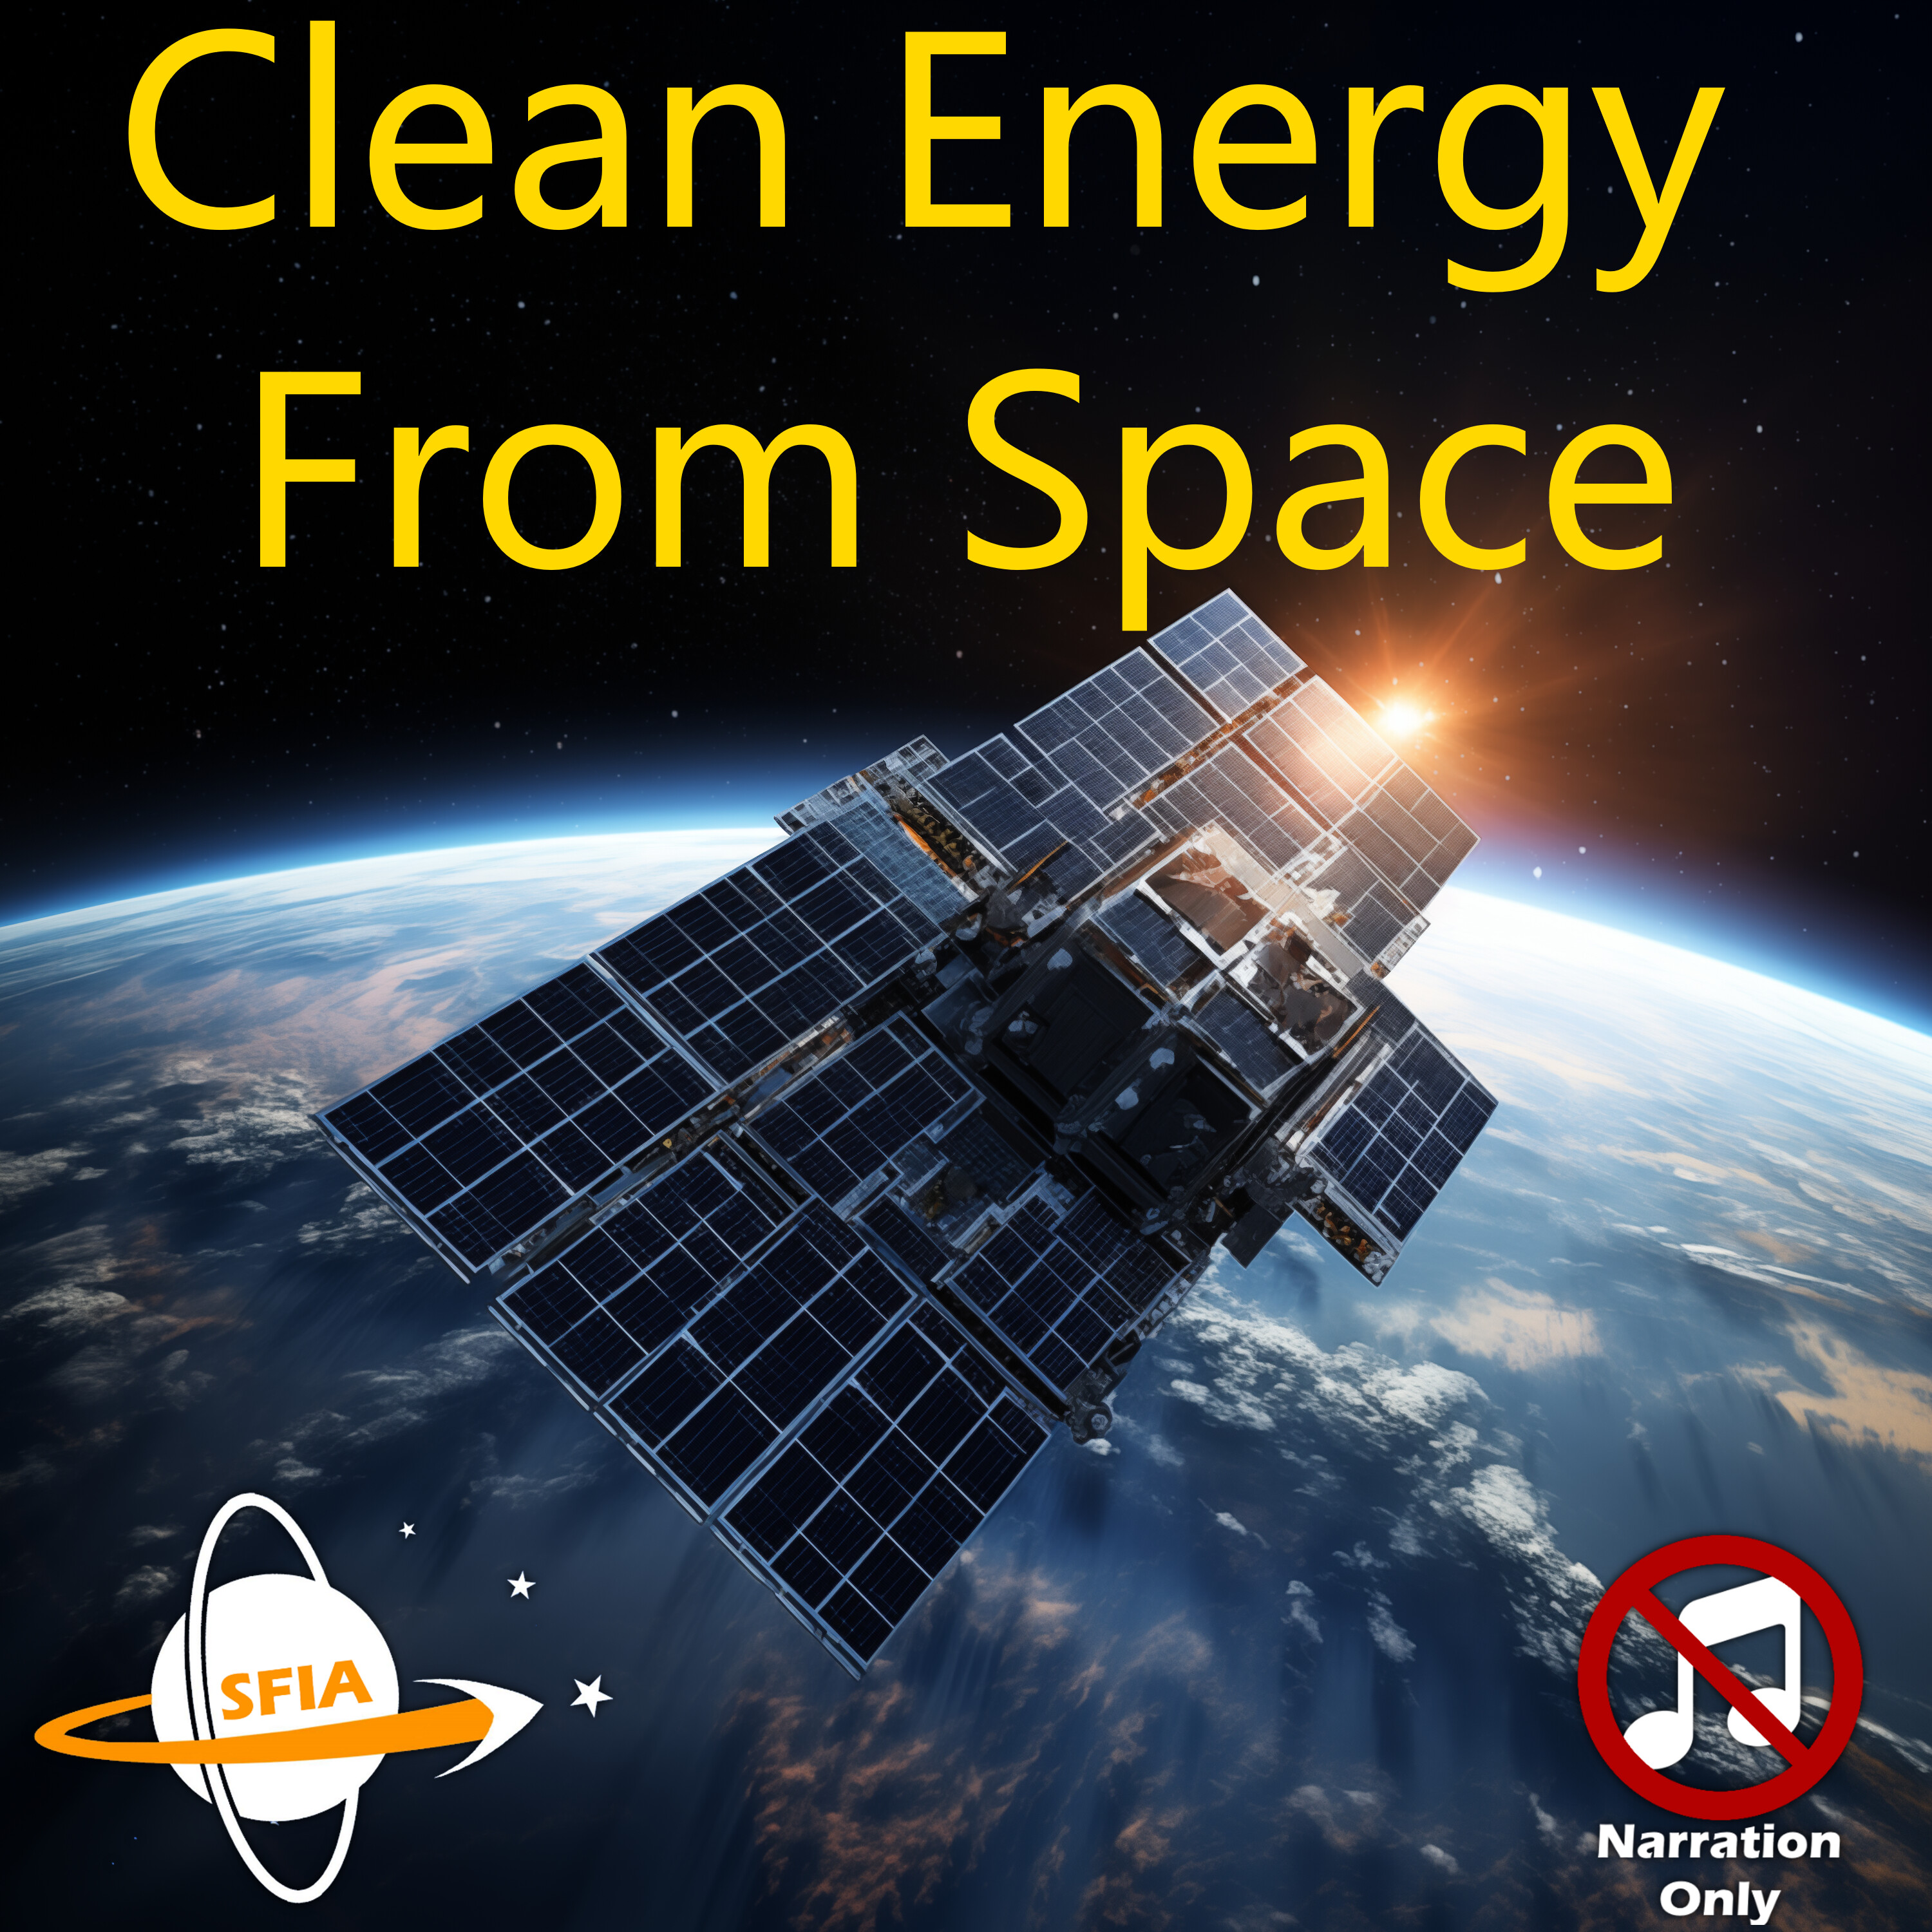 Clean Energy From Space (Narration Only)